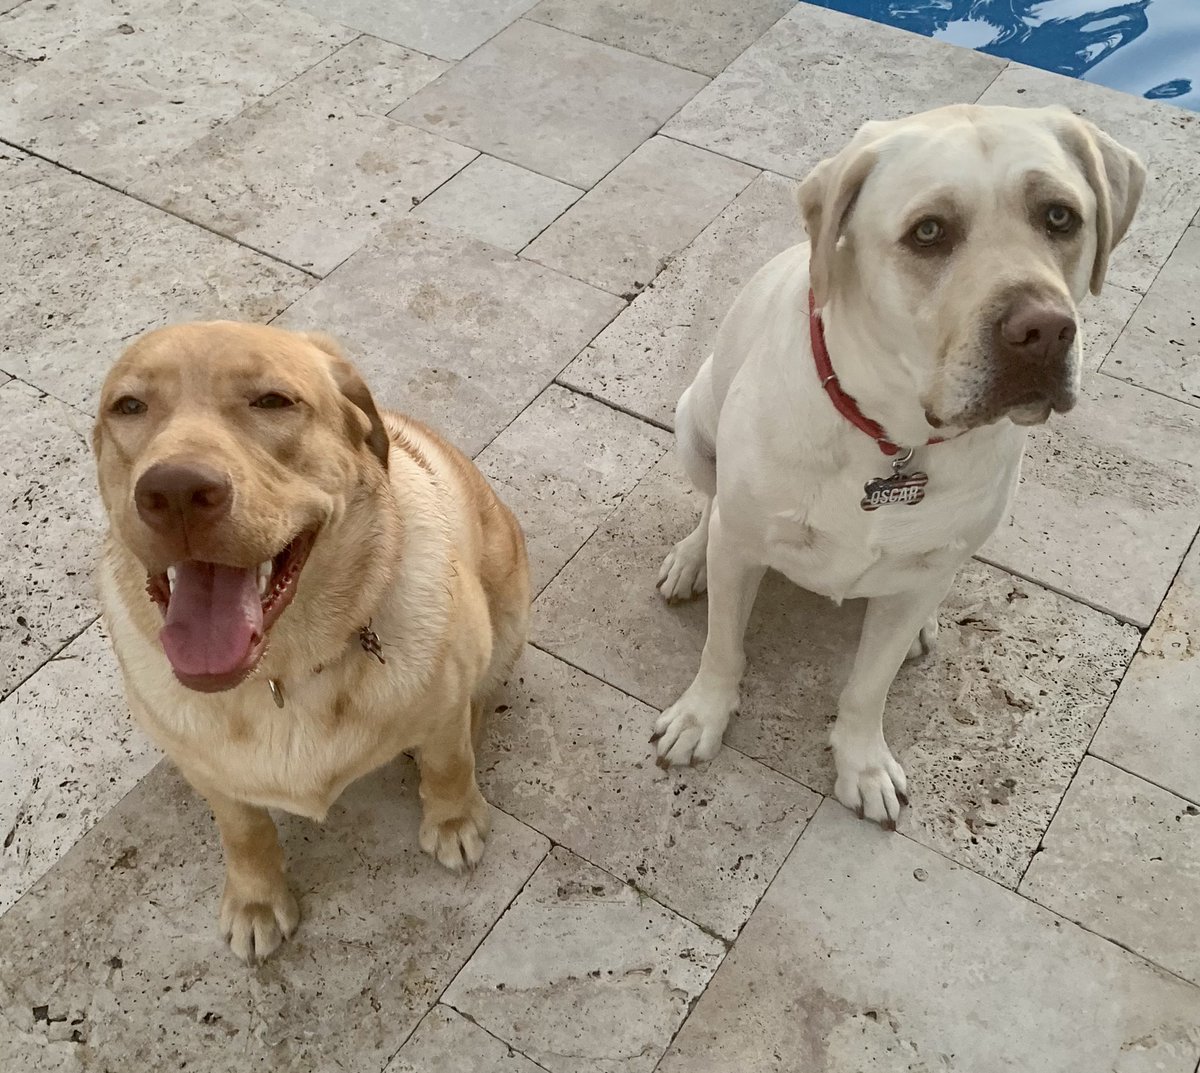 These two handsome fellas enjoying the cool weather. #therapydog #firstresponderspack #southflorida #coolweather #poolside #weekend